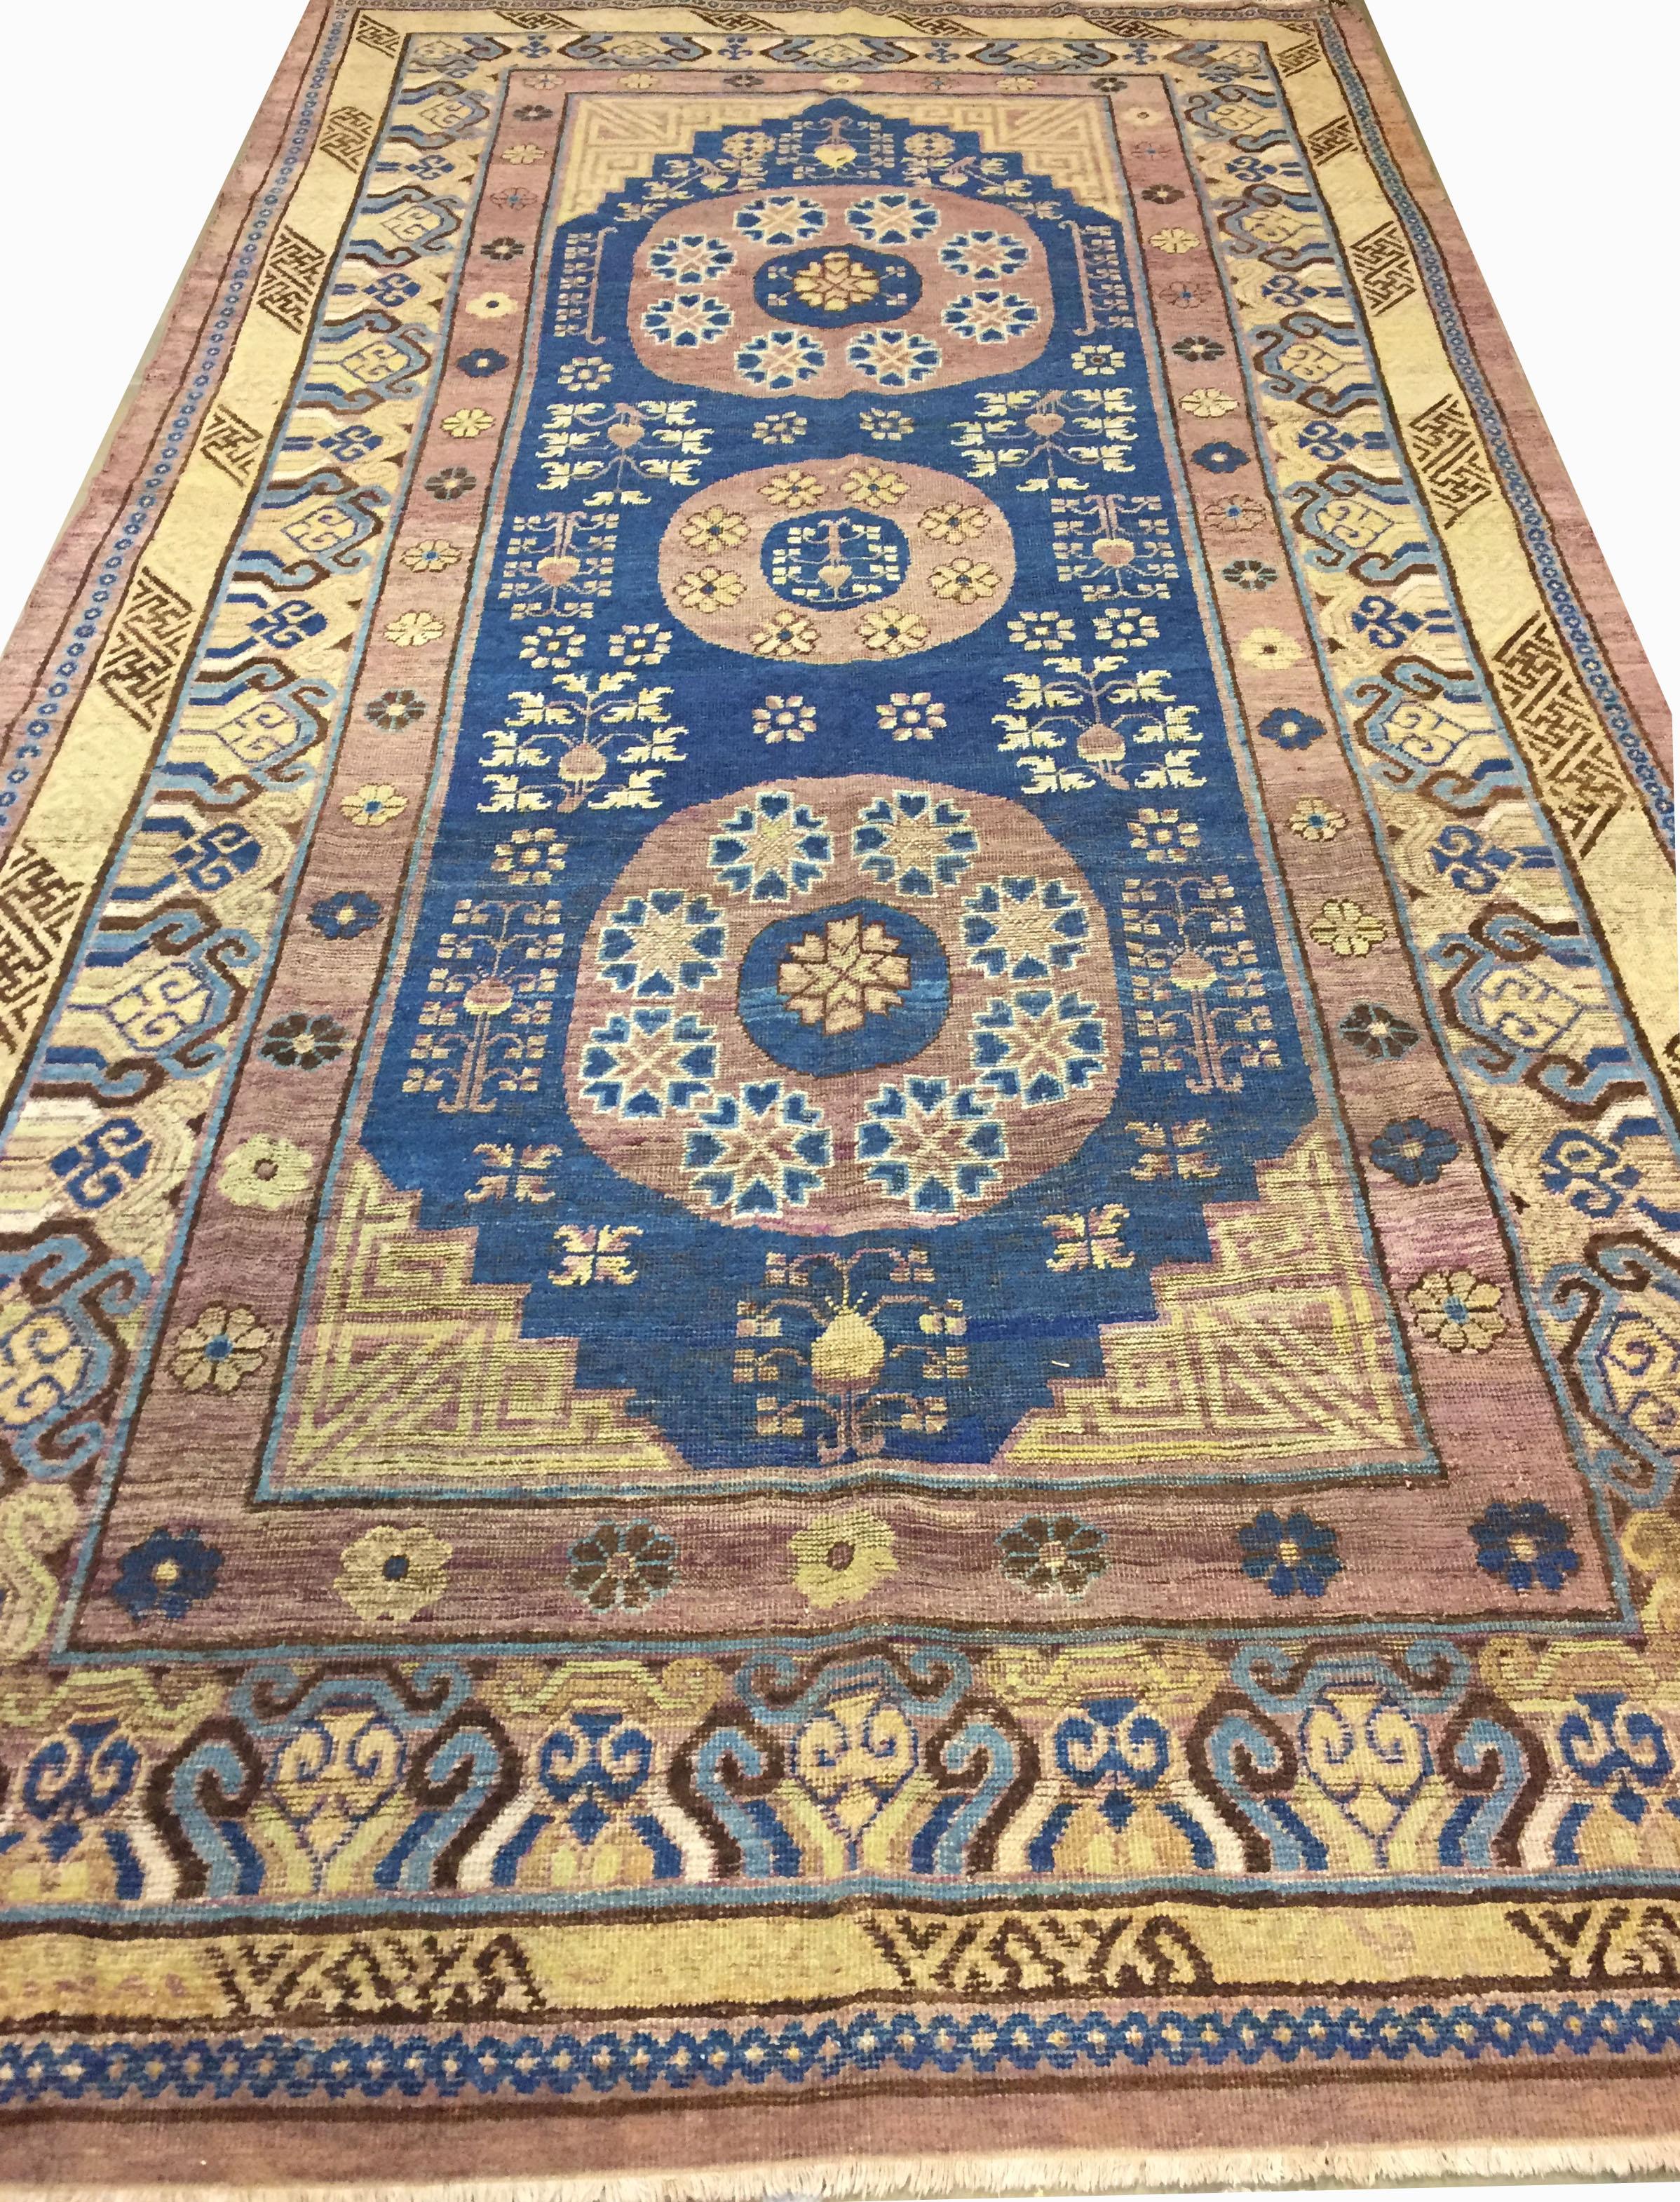 Antique Khotan rug, 5'11 x 11'5. The wonderful blues compliment the yellows so well and this style of rug suits traditional but also works exceptionally well in modern room setting. The condition of the rug is very good and it has been expertly